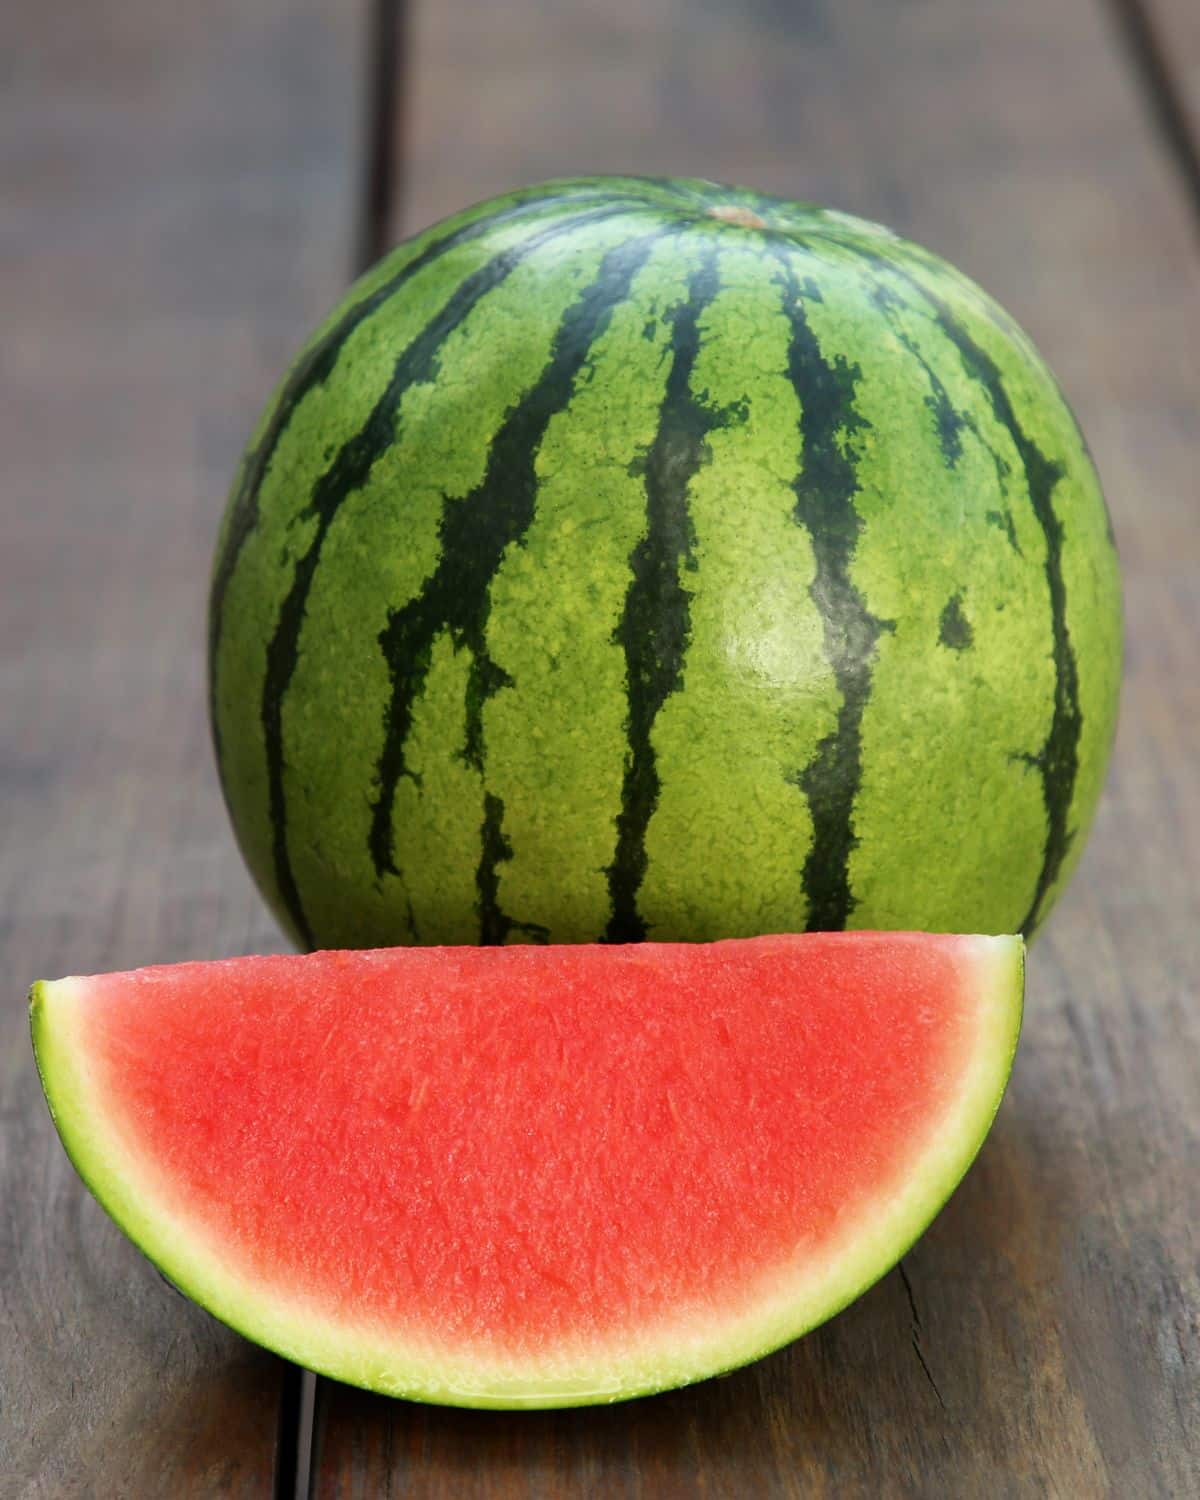 A whole watermelon with a wedge of watermelon next to it.